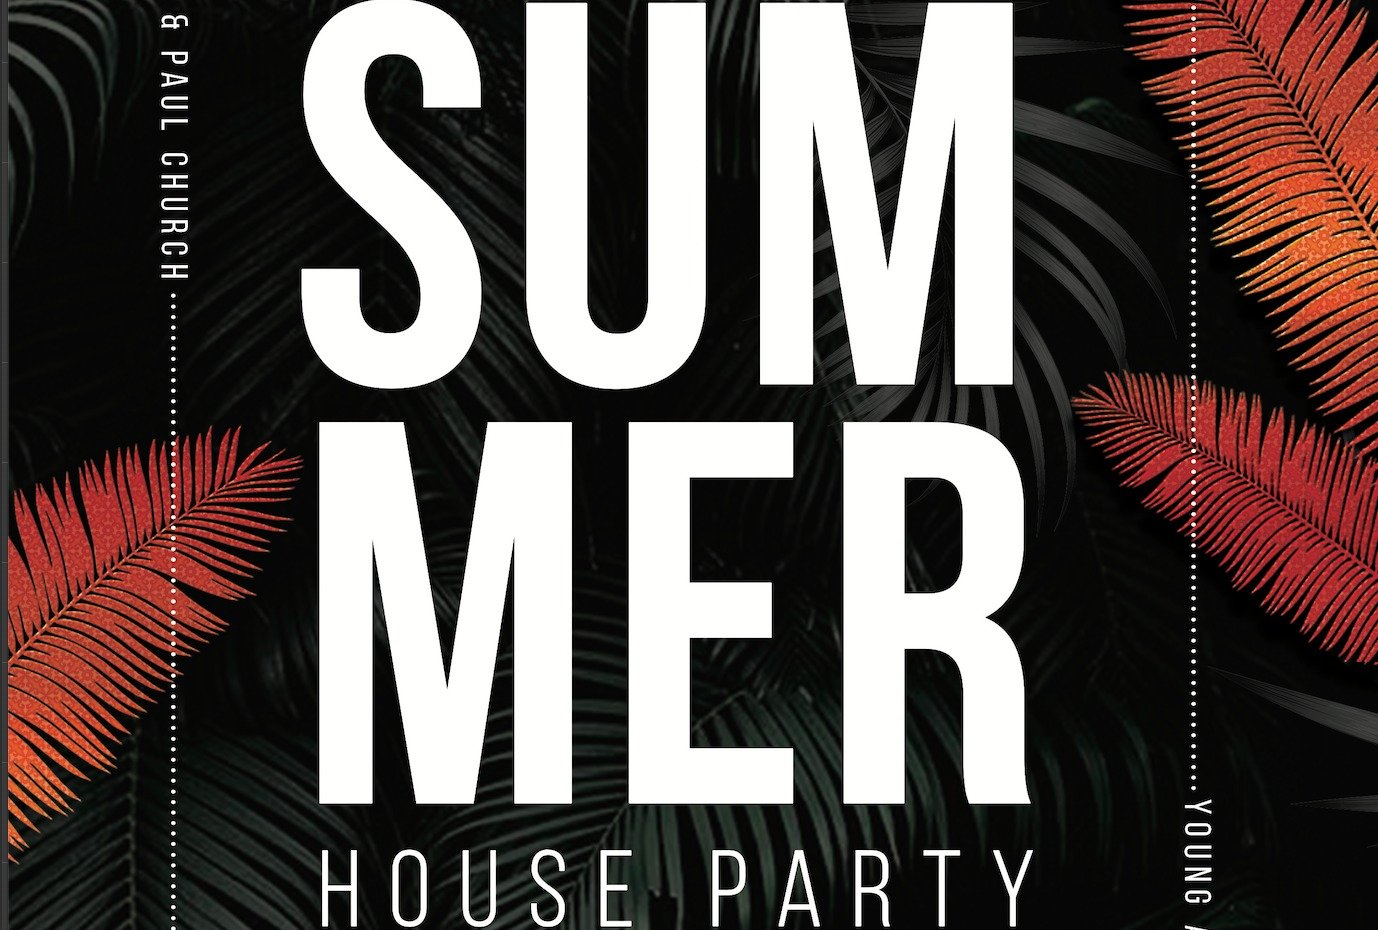 SUMMER HOUSE PARTY